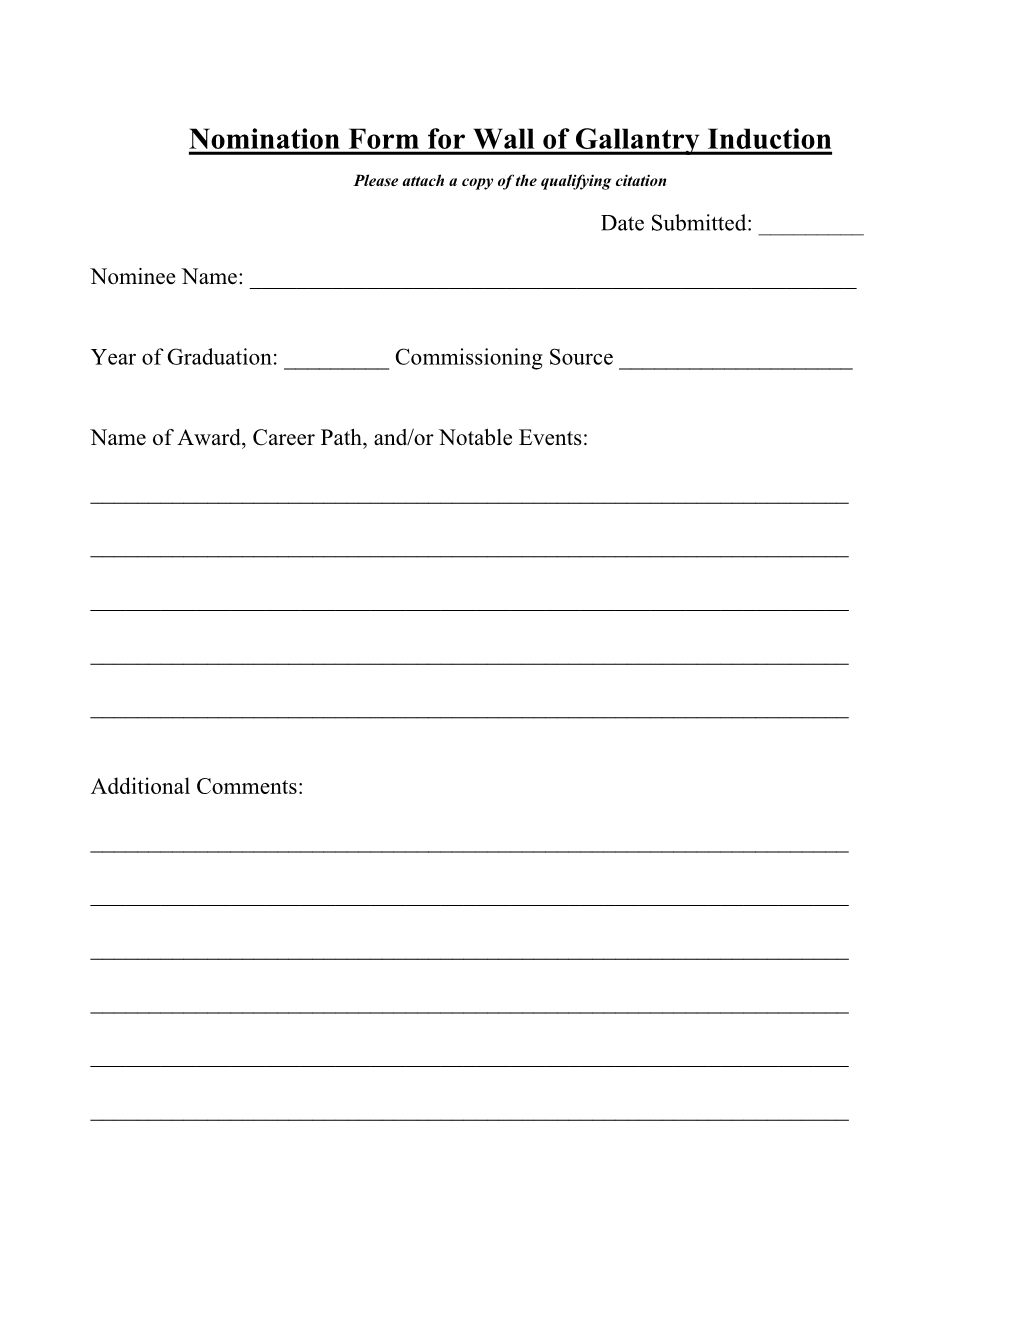 Nomination Form for Wall of Gallantry Induction